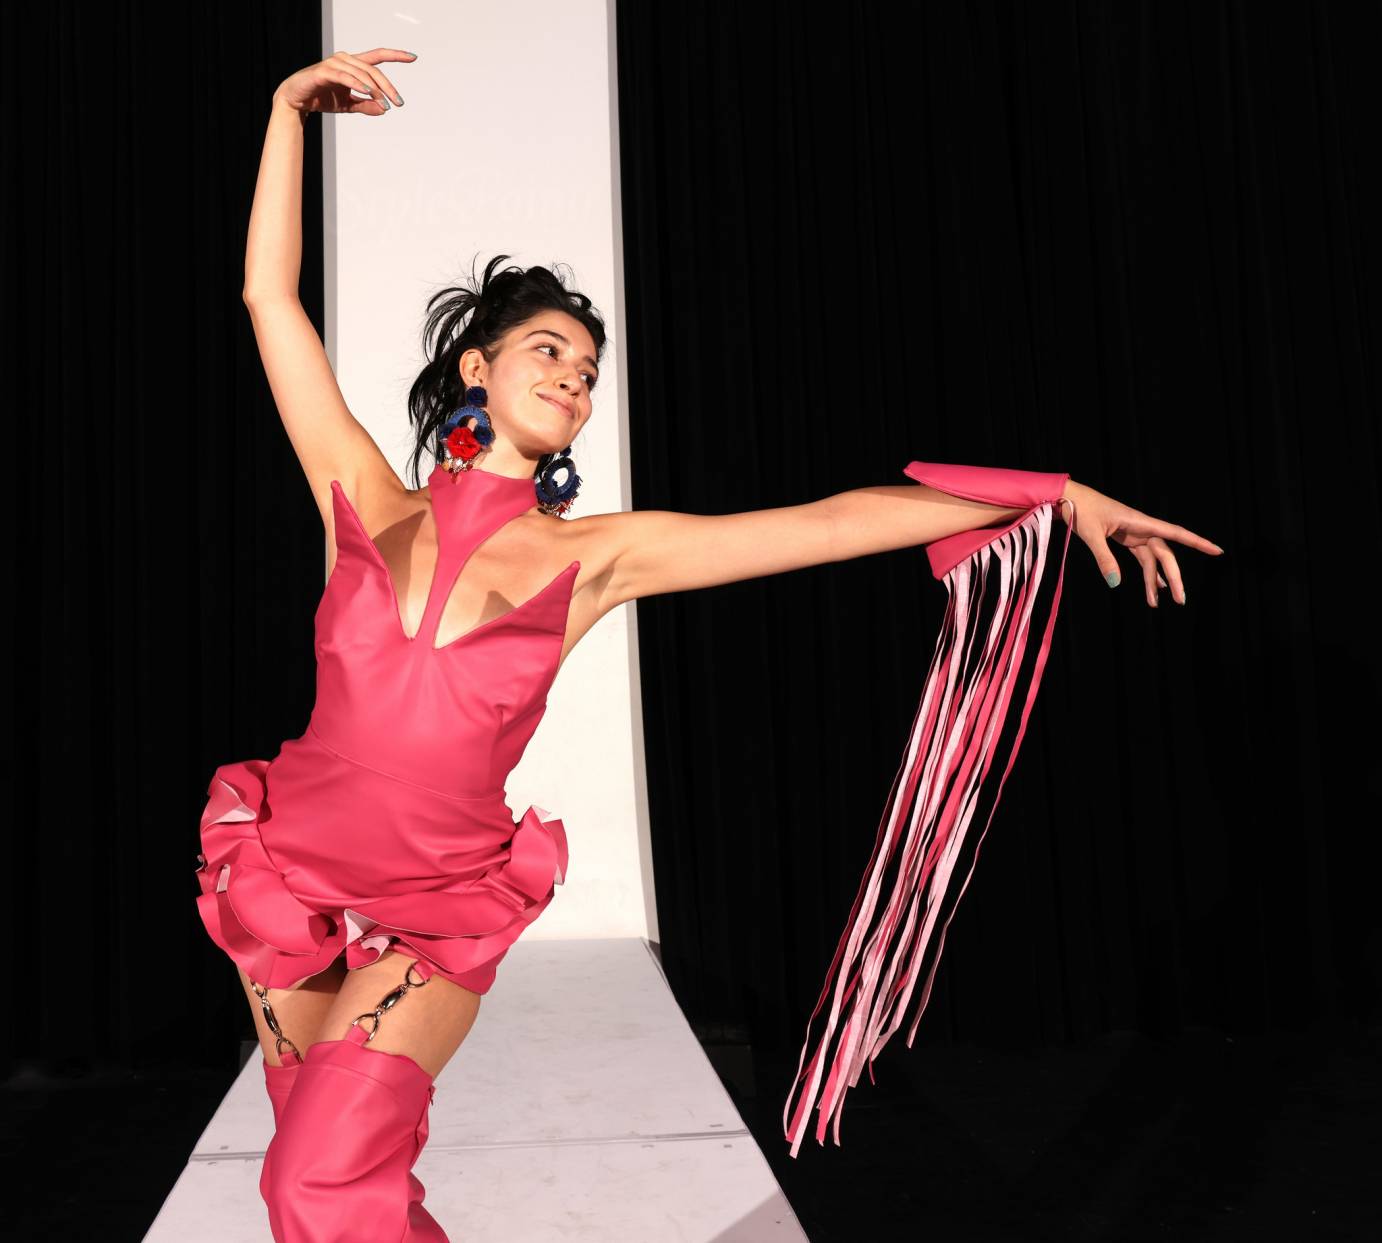 A woman in a red dress lifts her arms in an L. She looks to the left. A red bracelet with long fringe is on left wrist.